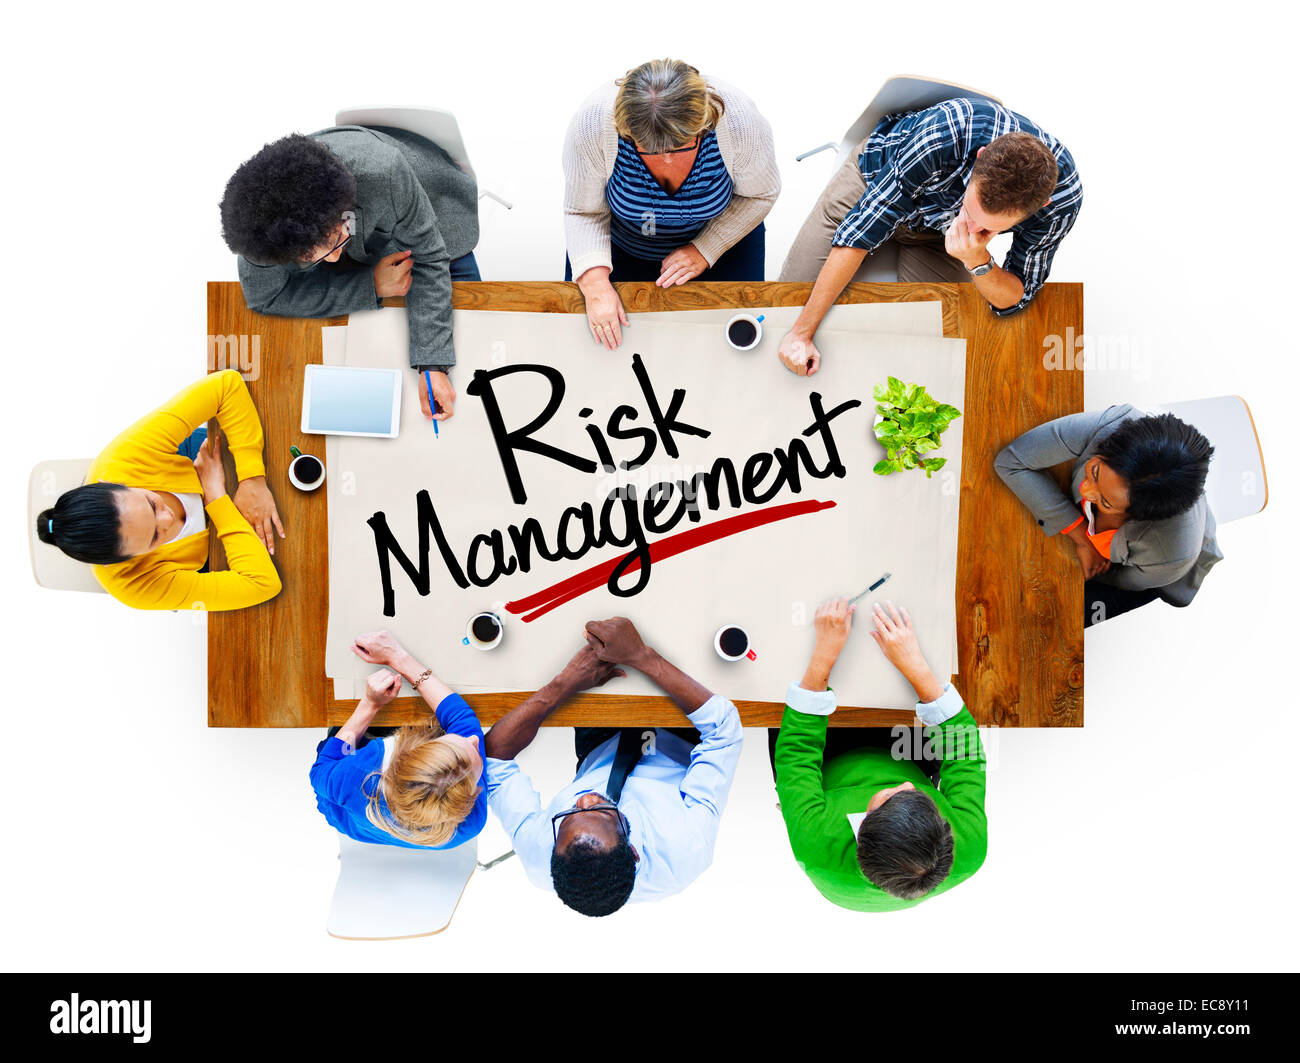 People in a Meeting and Risk Management Concepts Stock Photo